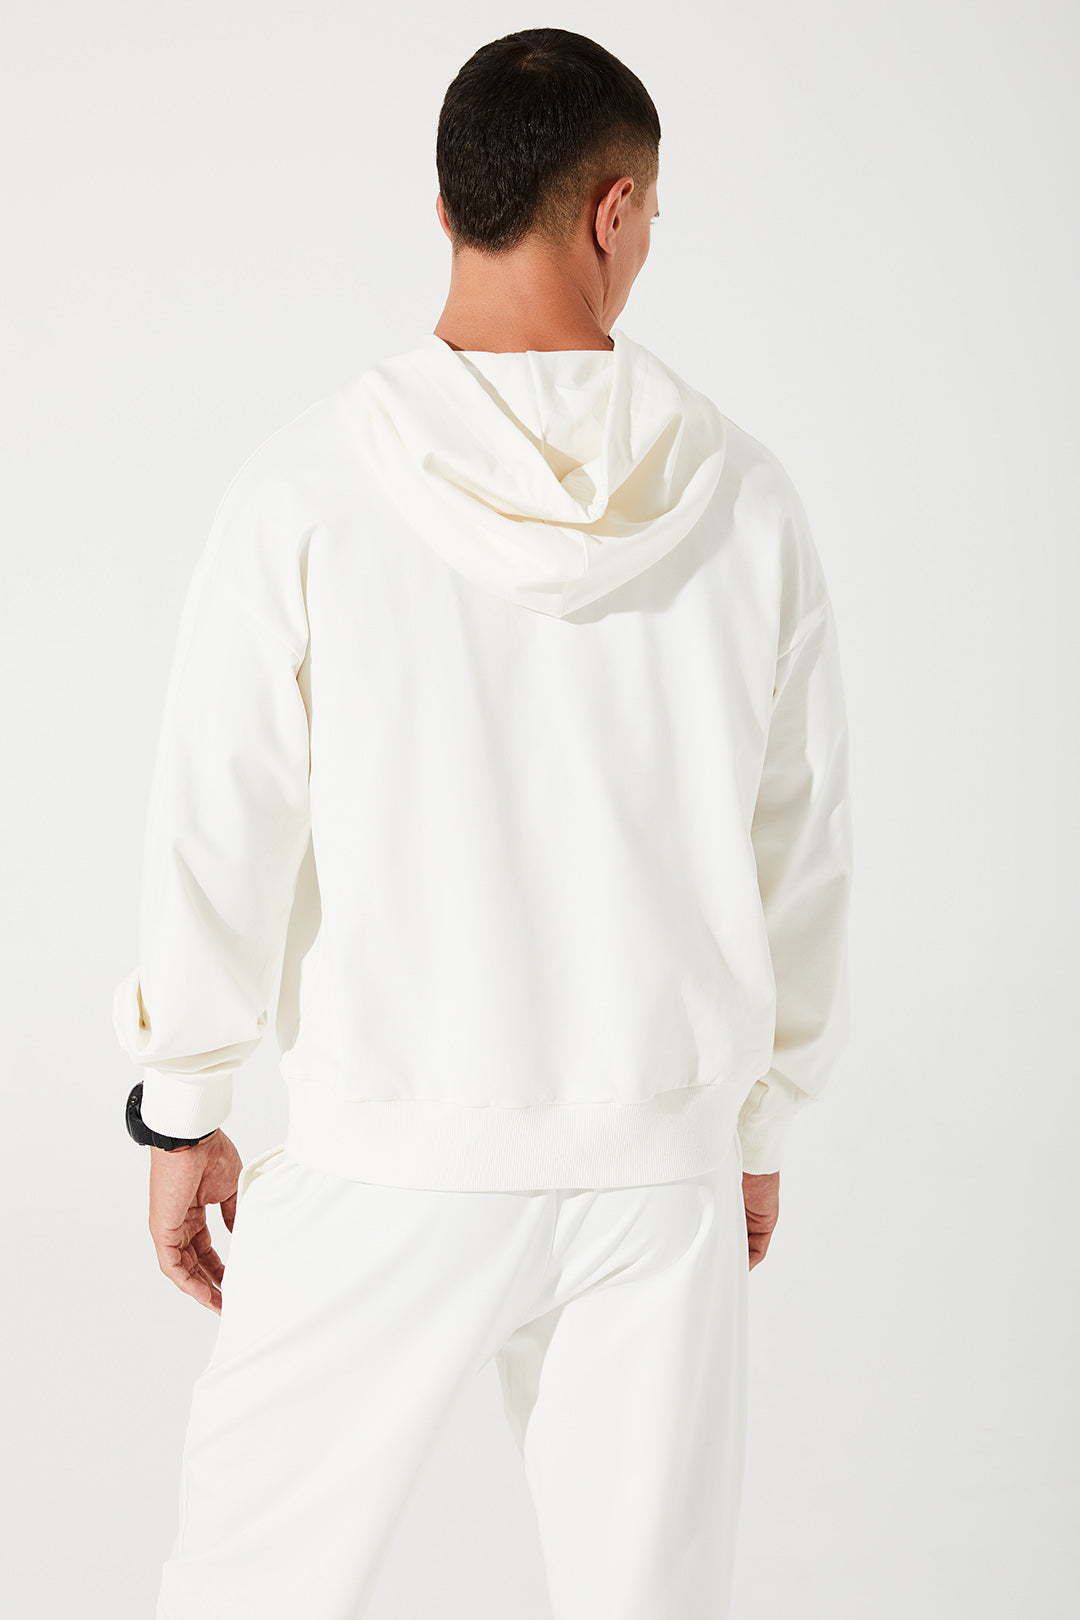 White men's hoodie with cropped top design, perfect for a stylish and casual look.